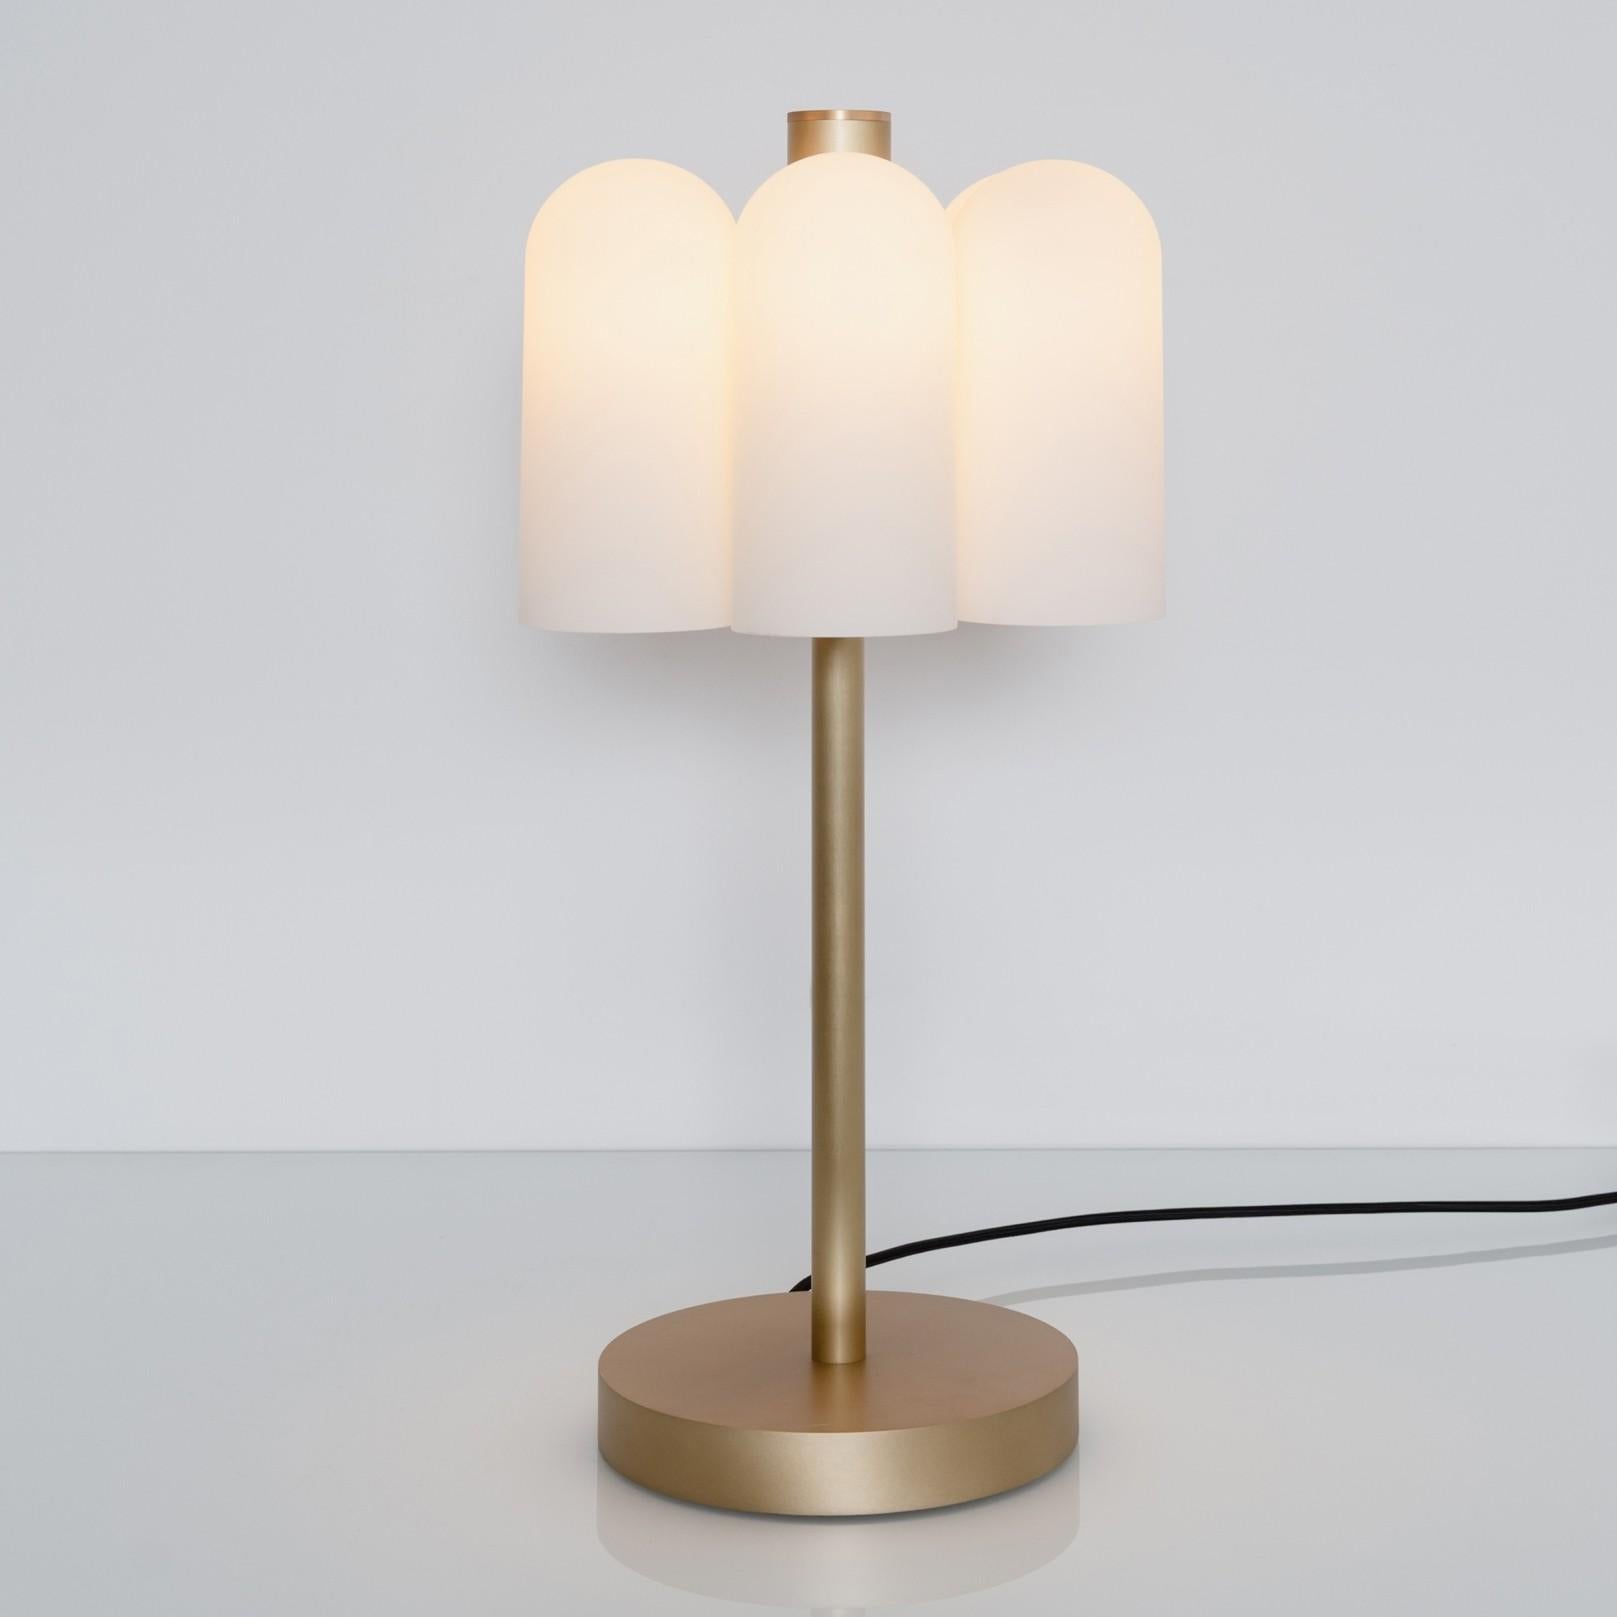 Odyssey 6 Brass Table Lamp by Schwung
Dimensions: D 31 x H 65 cm
Materials: Brass, frosted glass

Finishes available: Black gunmetal, polished nickel, brass


Schwung is a German word, and loosely defined, means energy or momentum of a